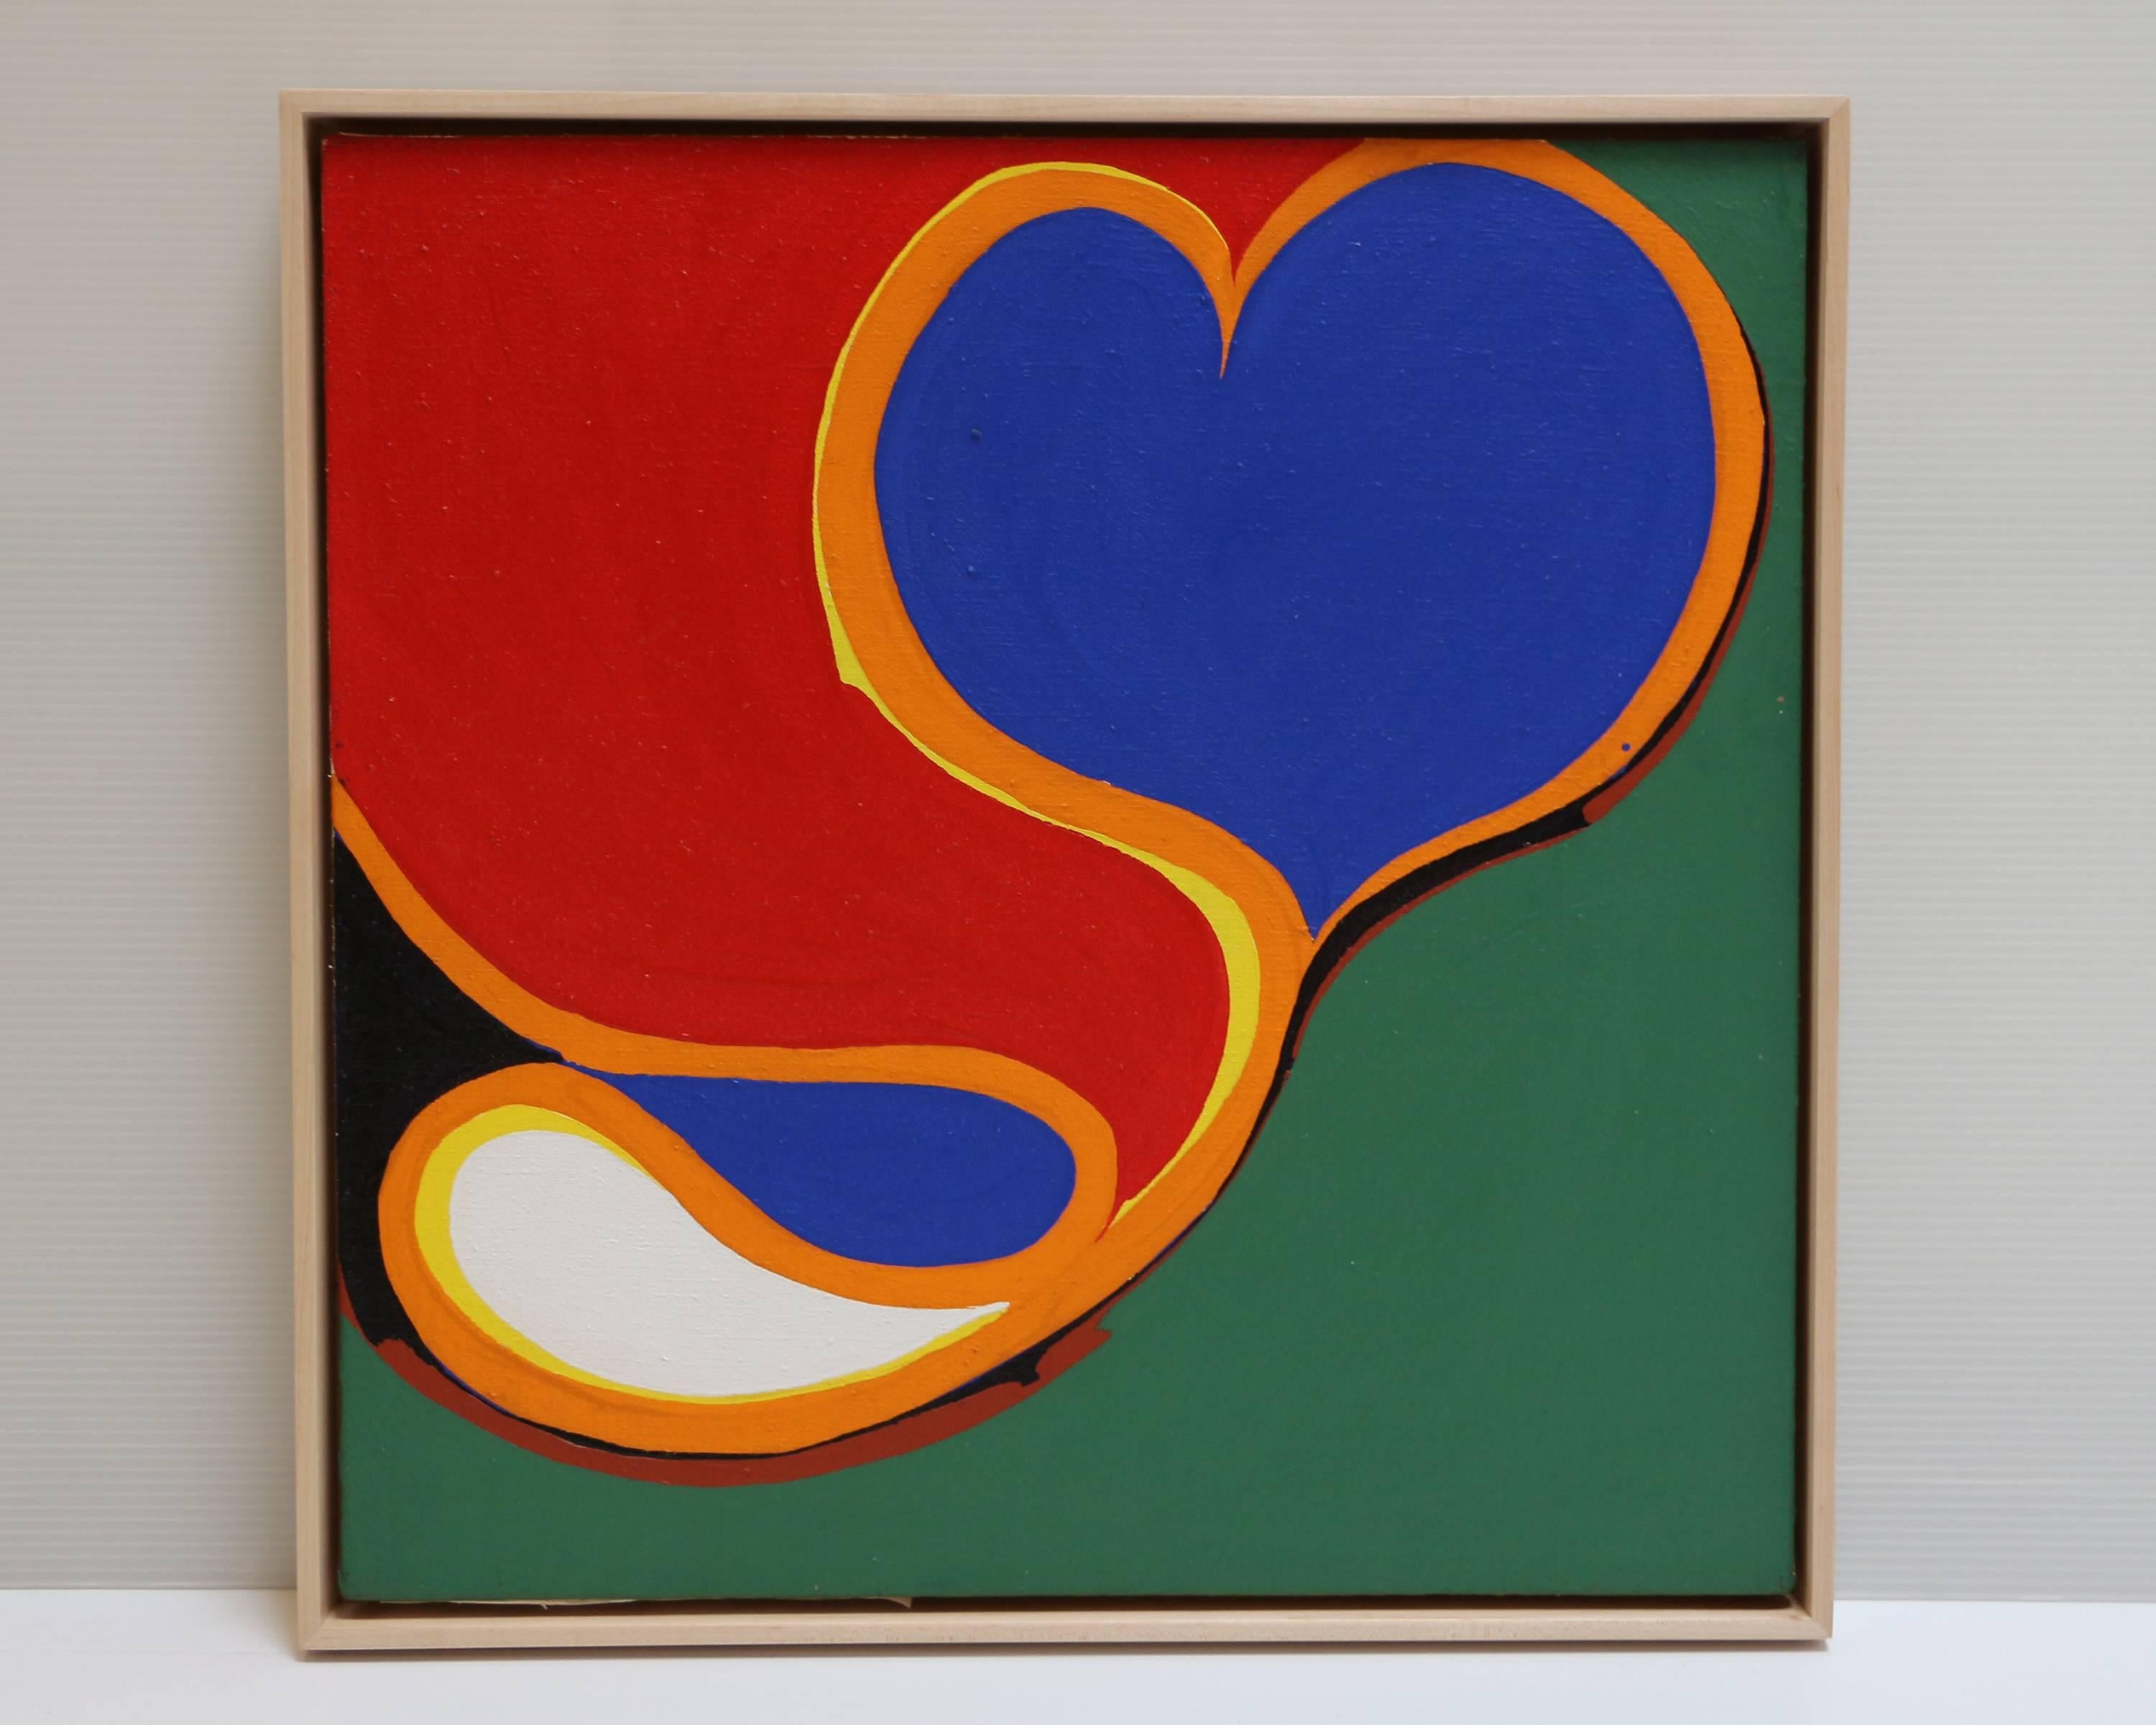 Hidalgo #11, colorful abstract geometric acrylic painting with heart shape  - Painting by Matsumi Kanemitsu